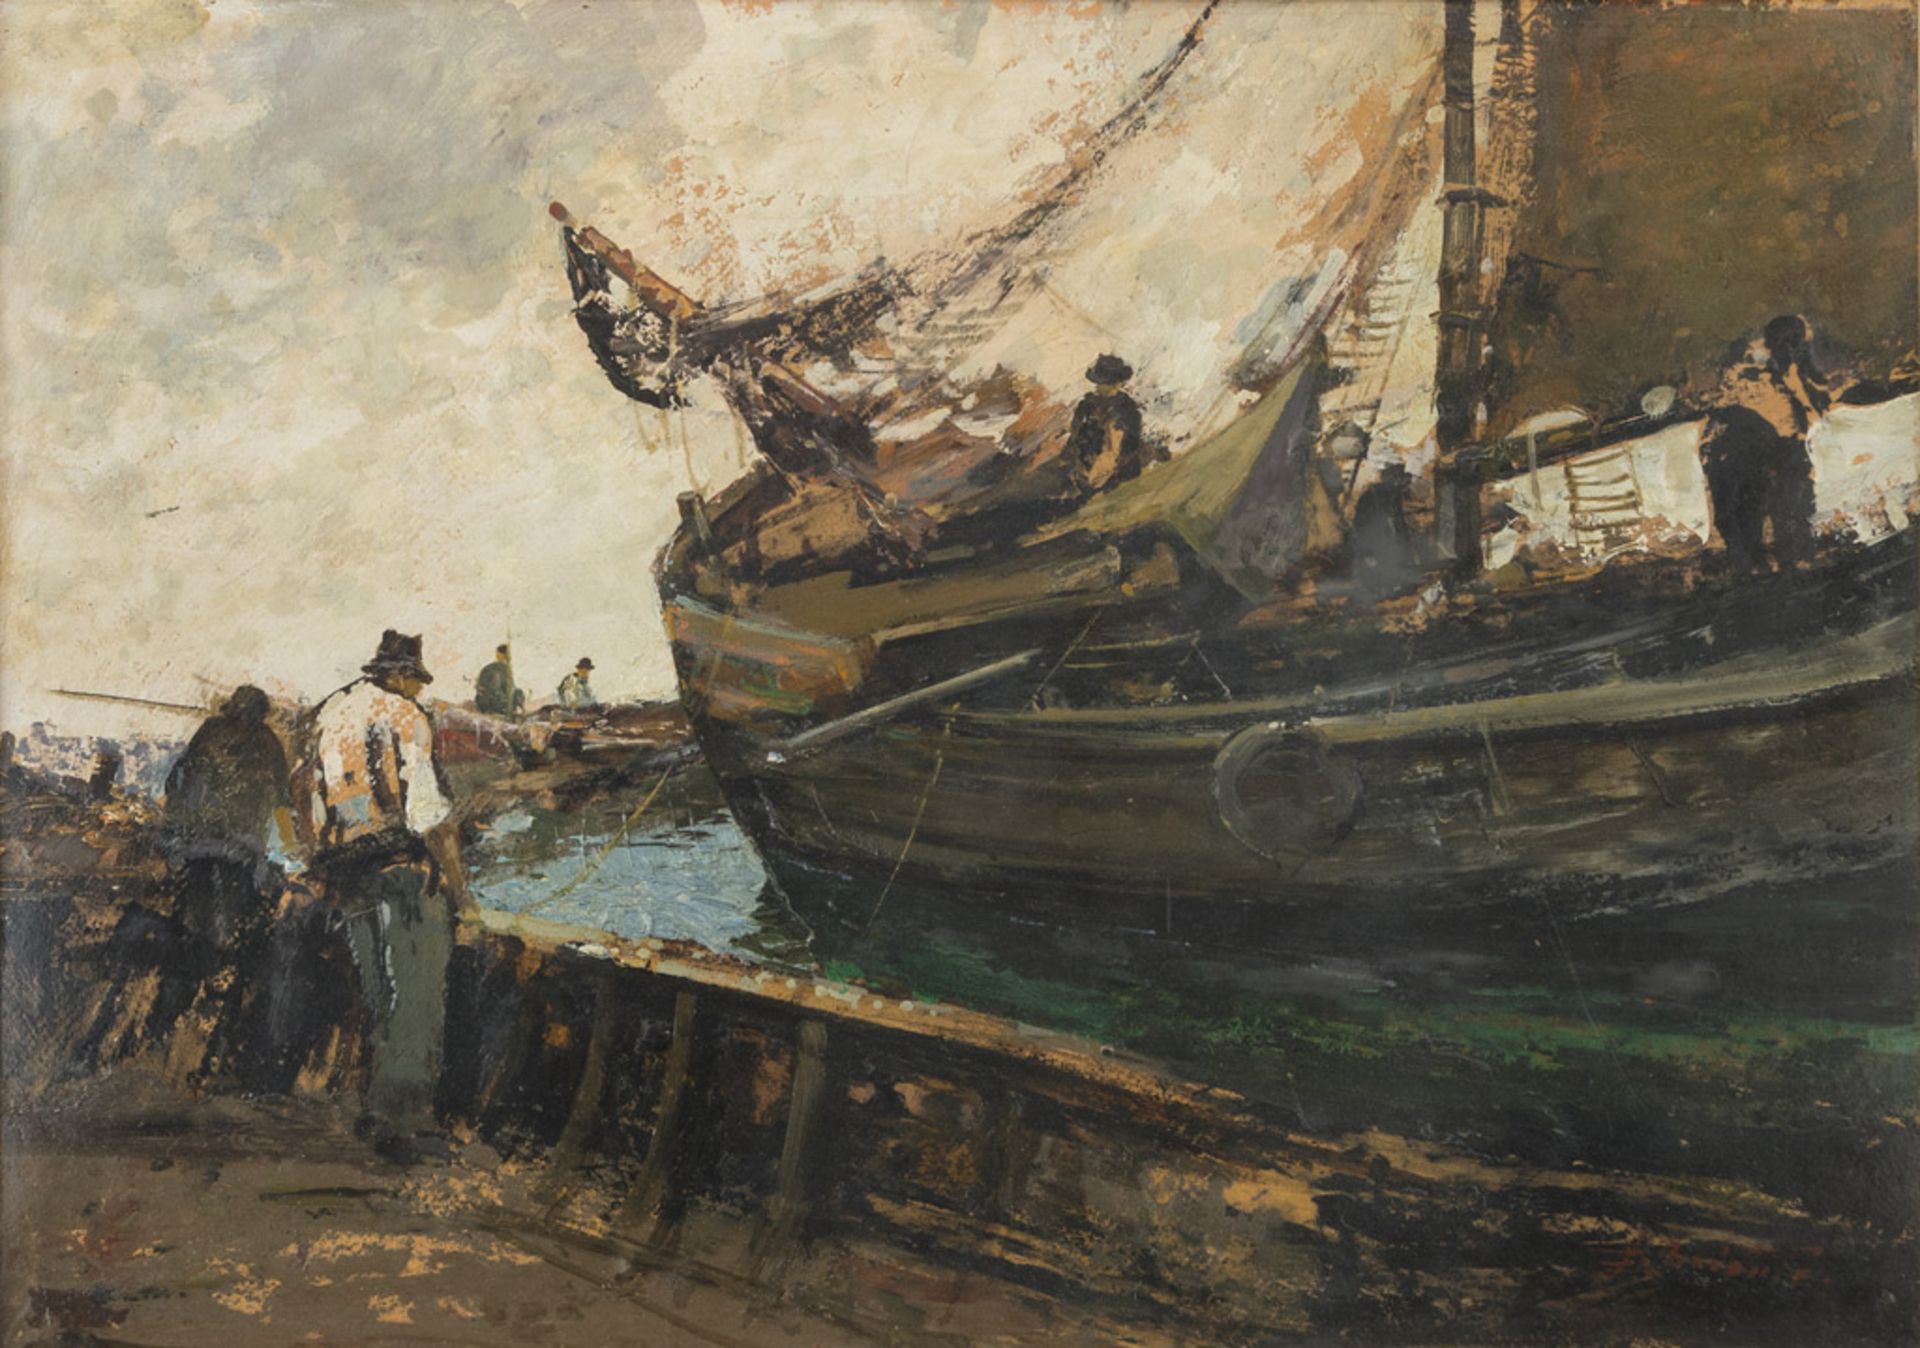 EZELINO BRIANTE (Naples 1901 - Rome 1971) RETURN FROM FISHING Oil on cardboard, cm. 48 x 67 Signed